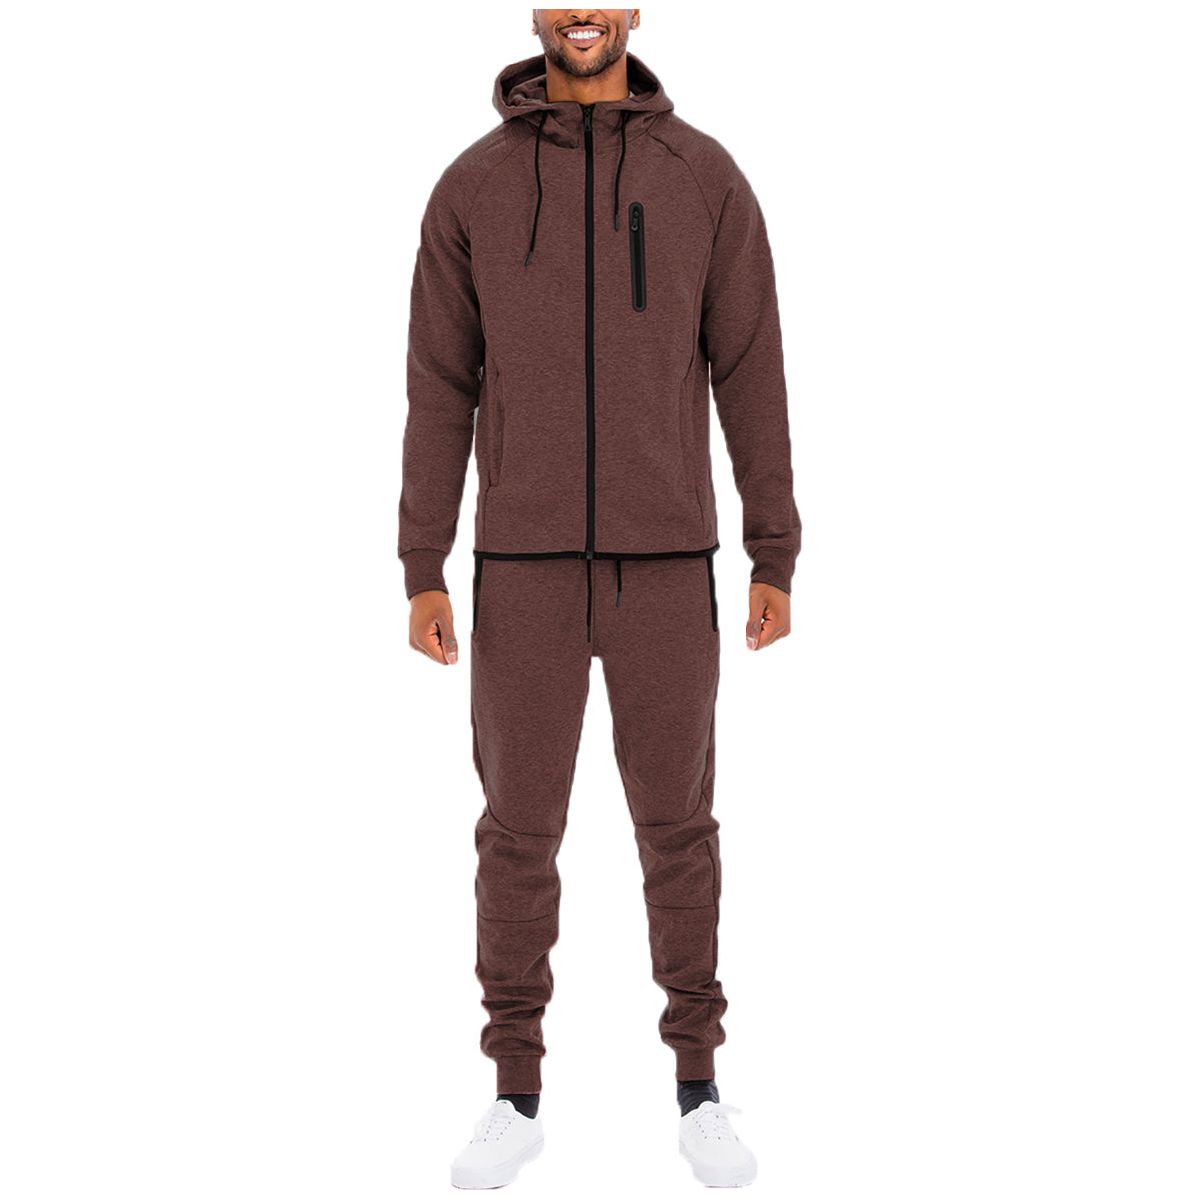 Dynamic Solid Tech Sweat Suit - KME means the very best